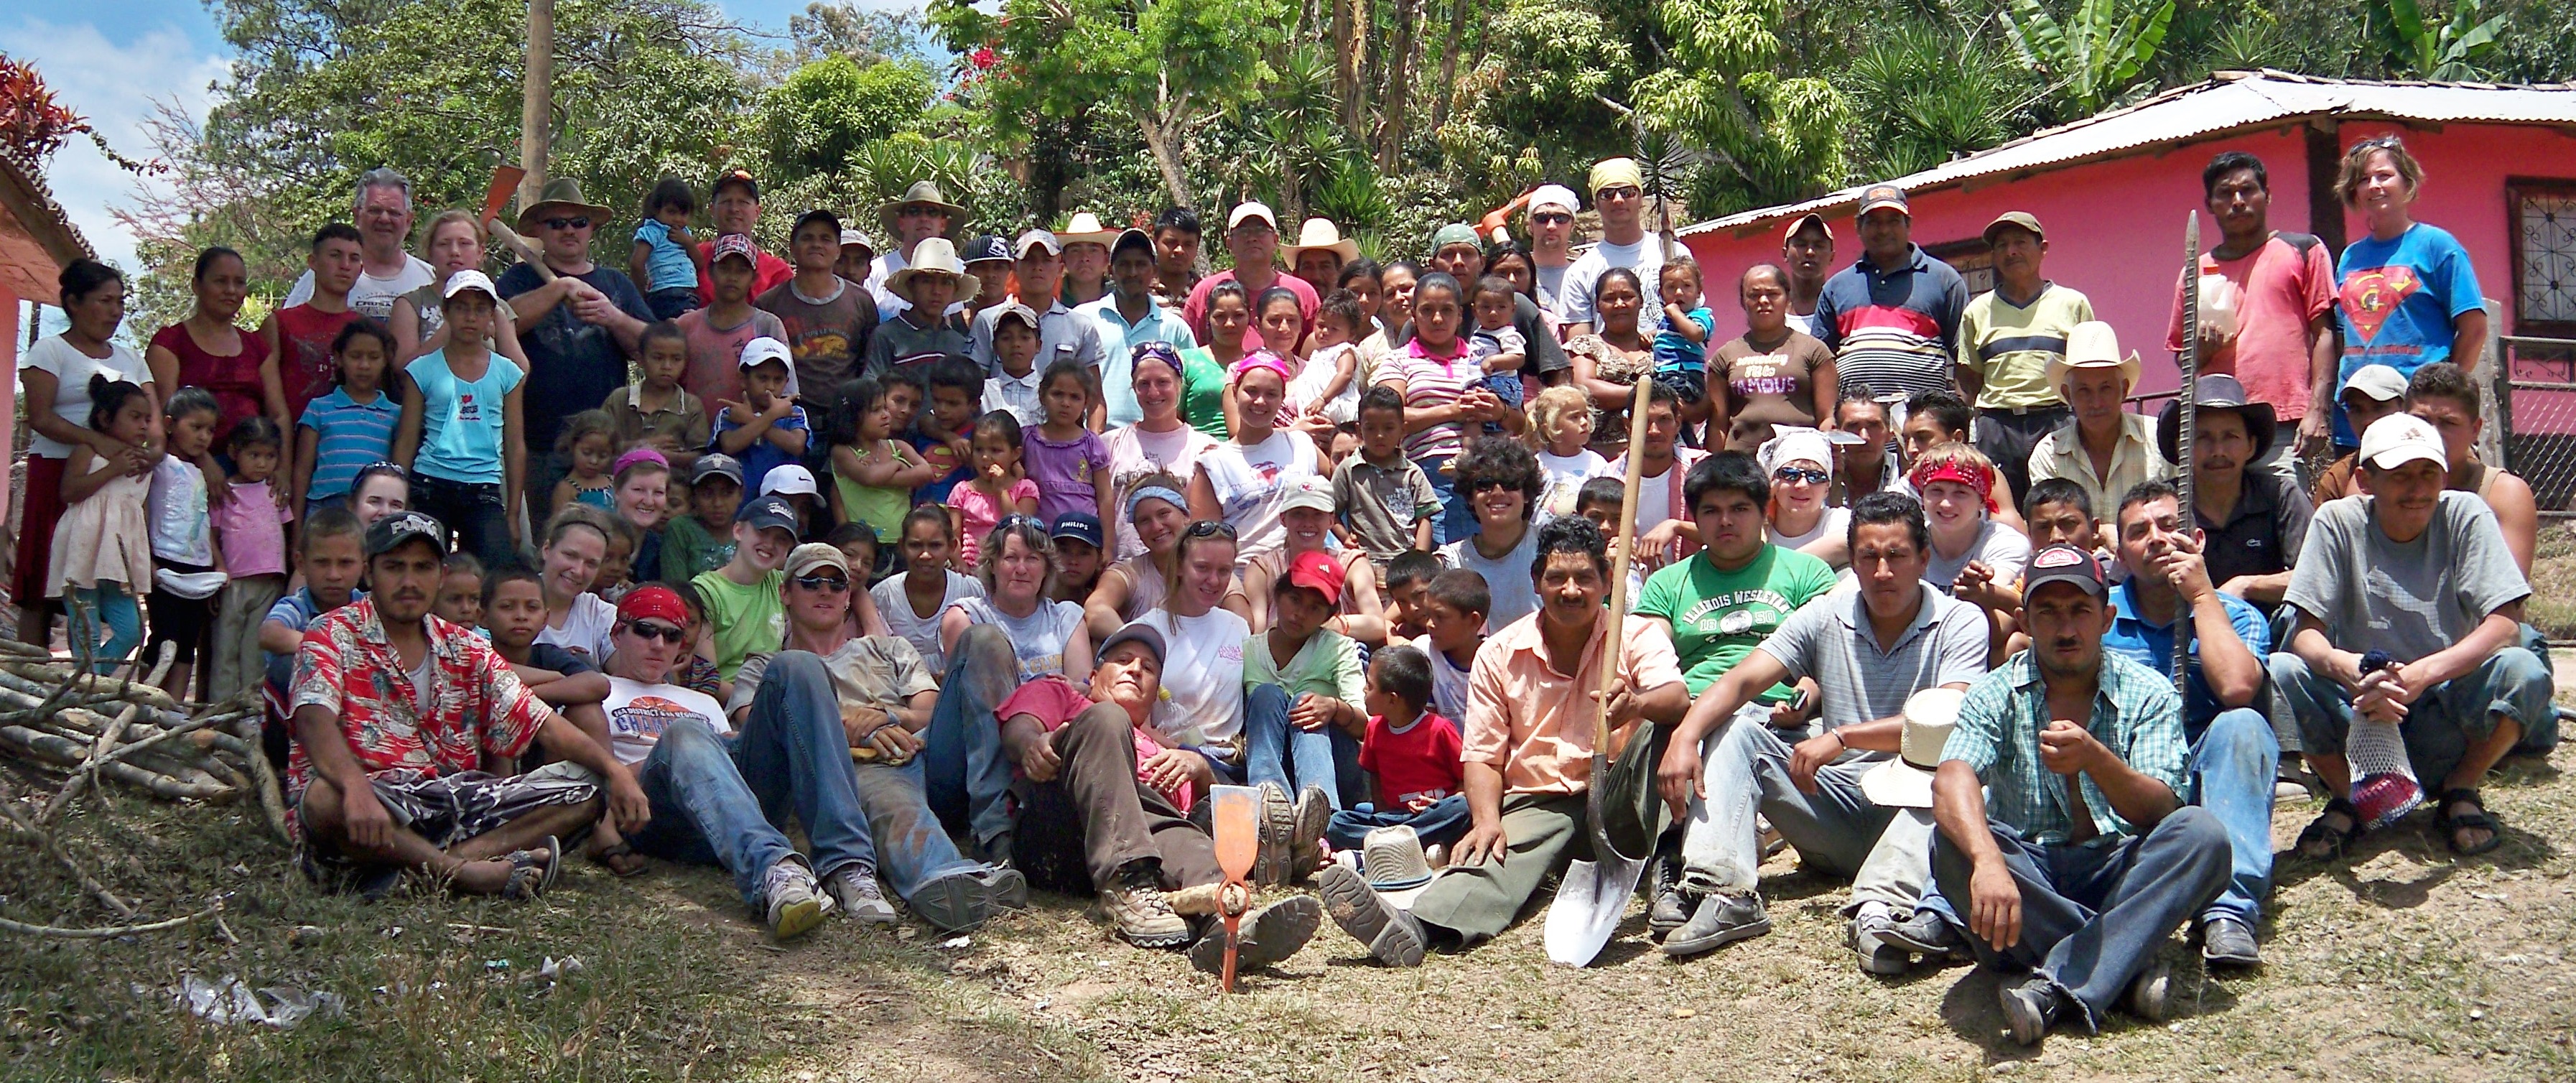 Missioners pose with La Florida villagers